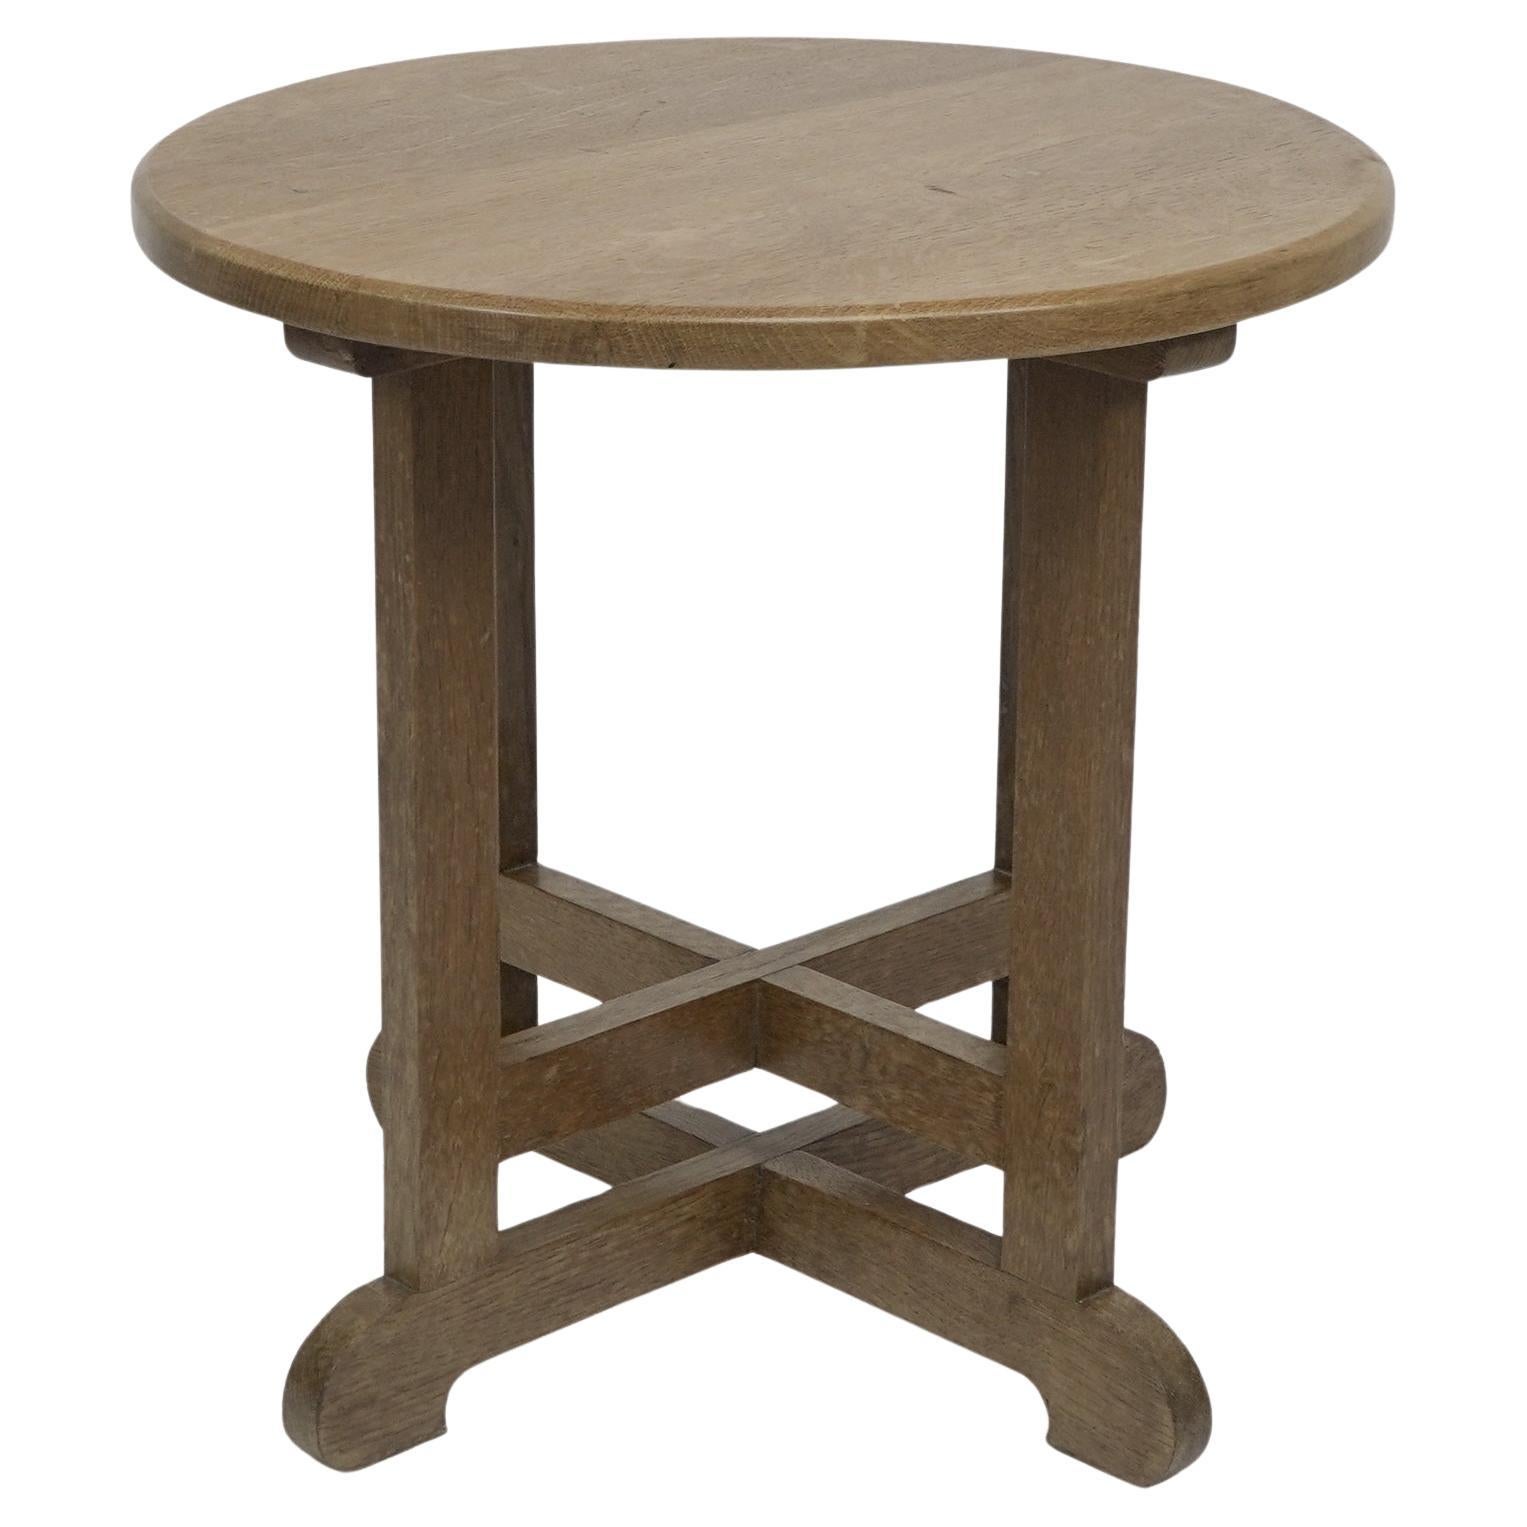 Heals of London in the style of. An oak circular oak side or occasional table. For Sale